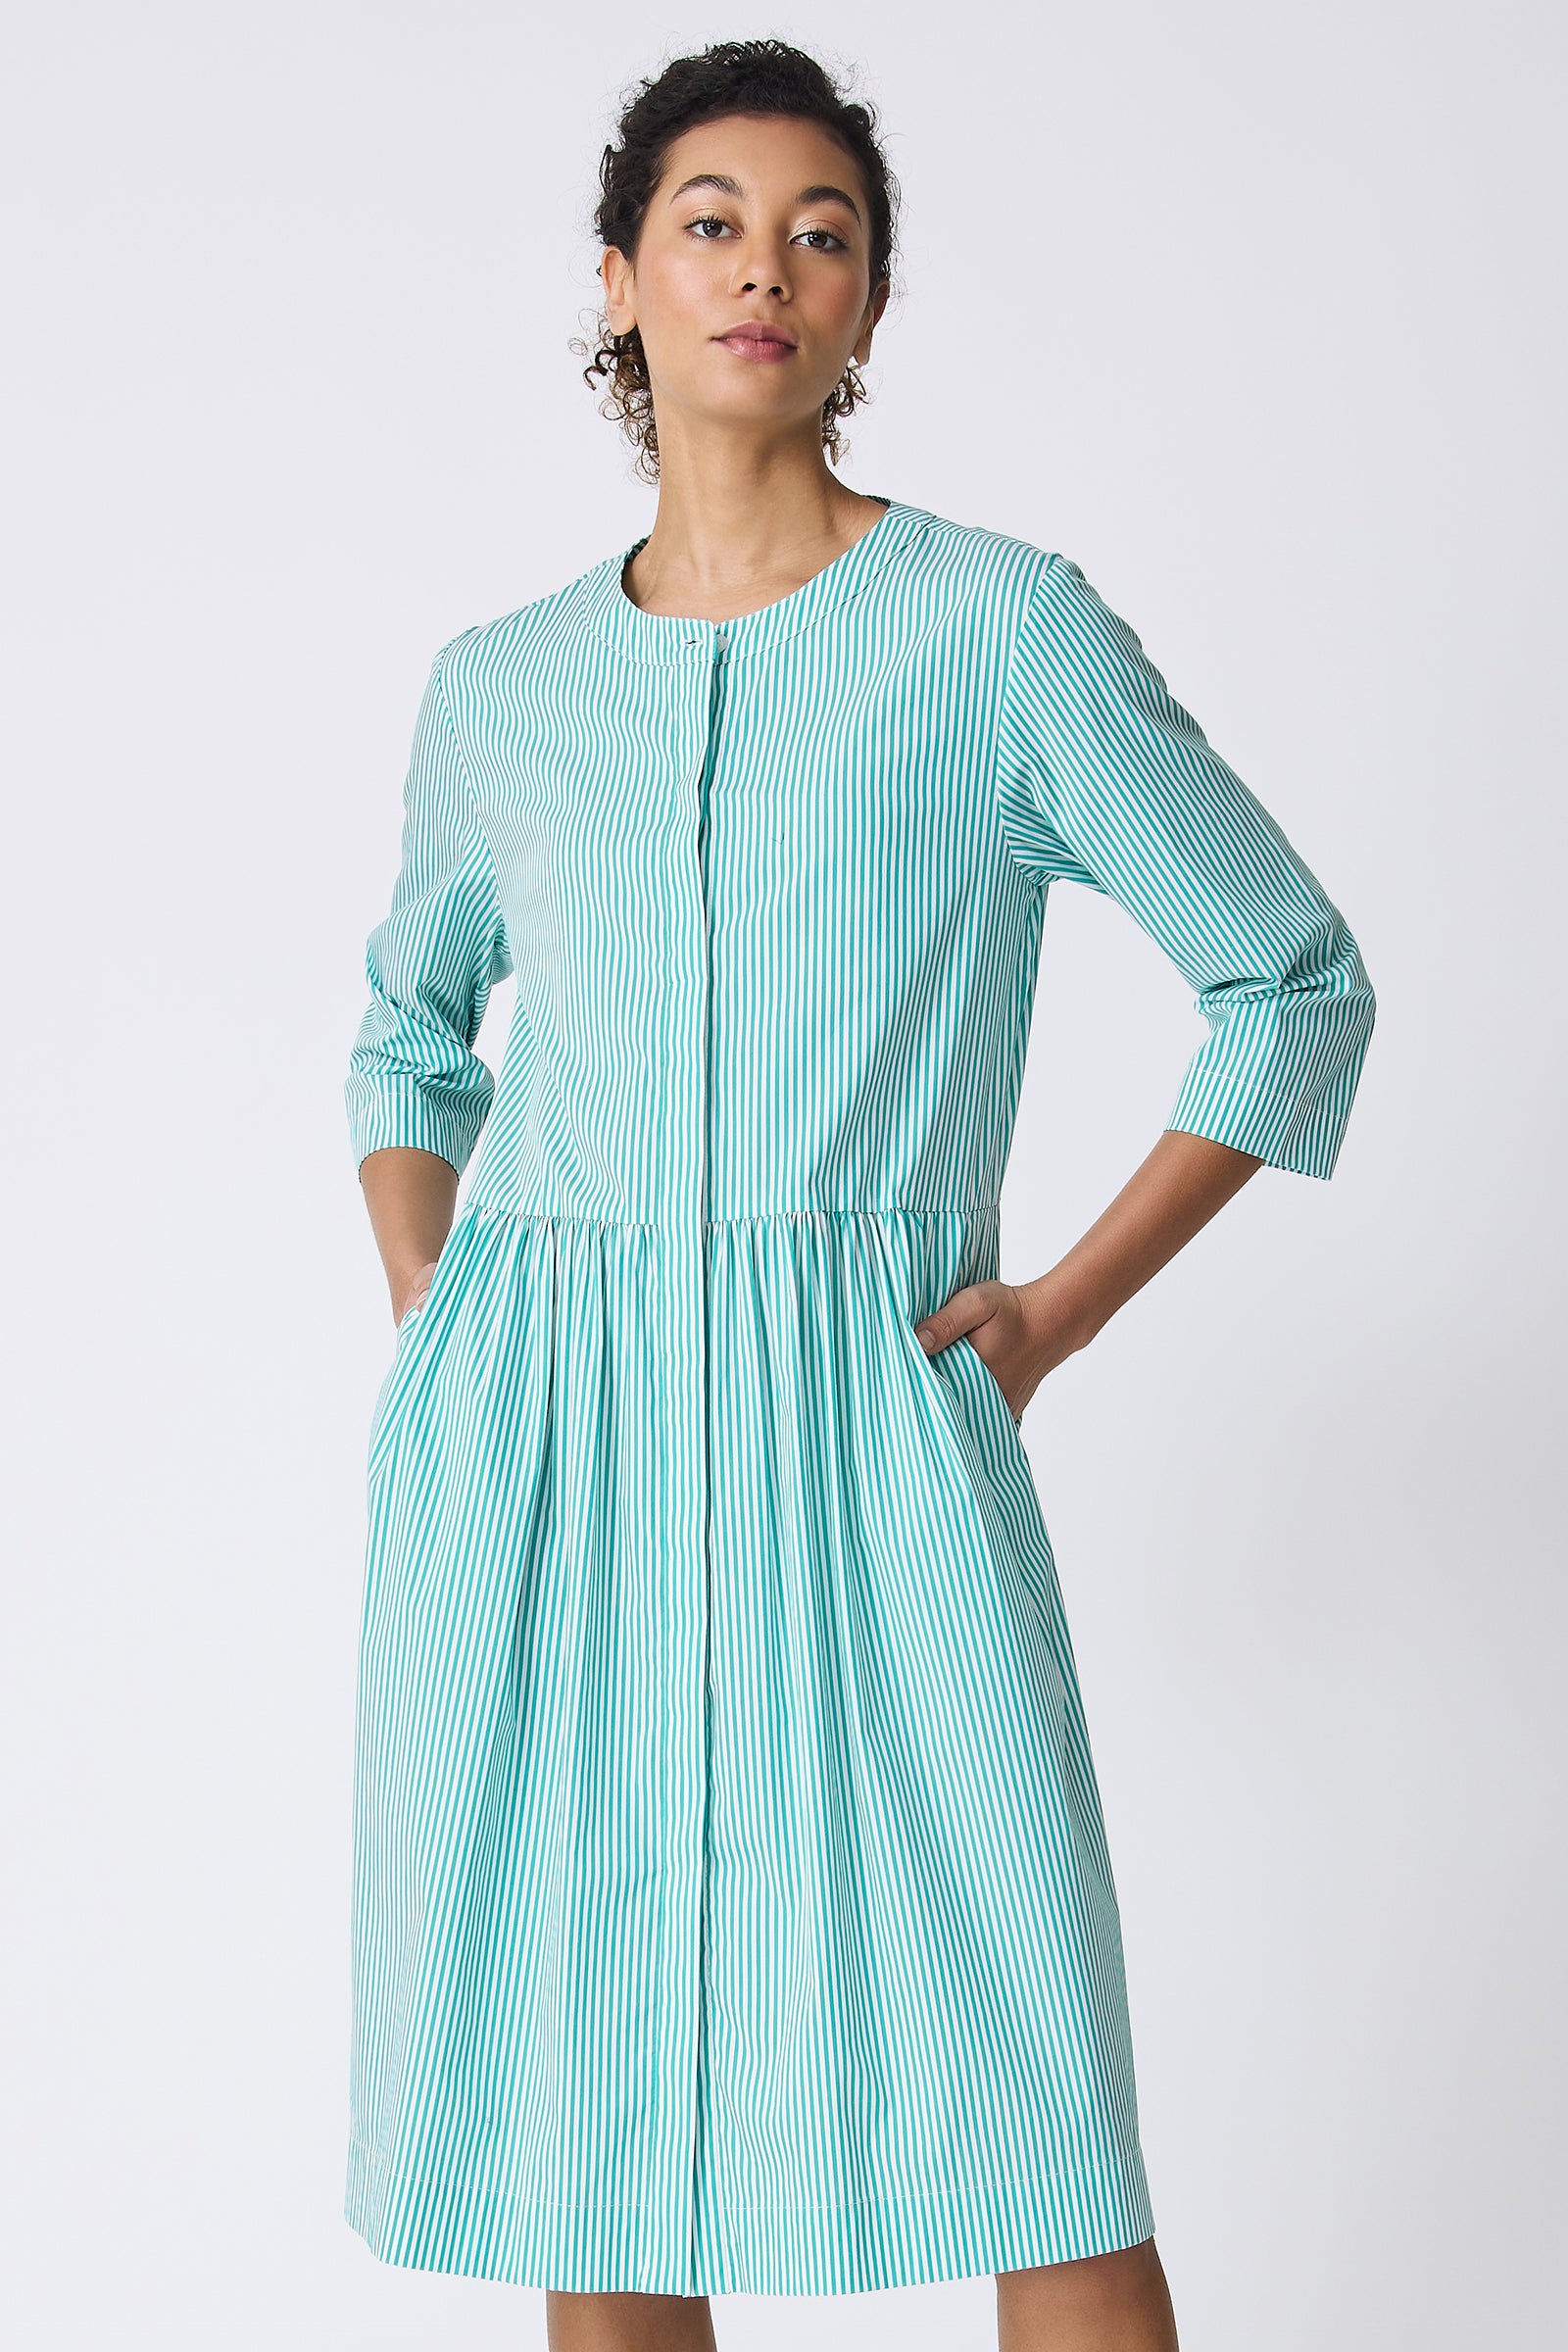 Kal Rieman Abby Shirt Dress in Miami Stripe Green on model with hands in pockets front view